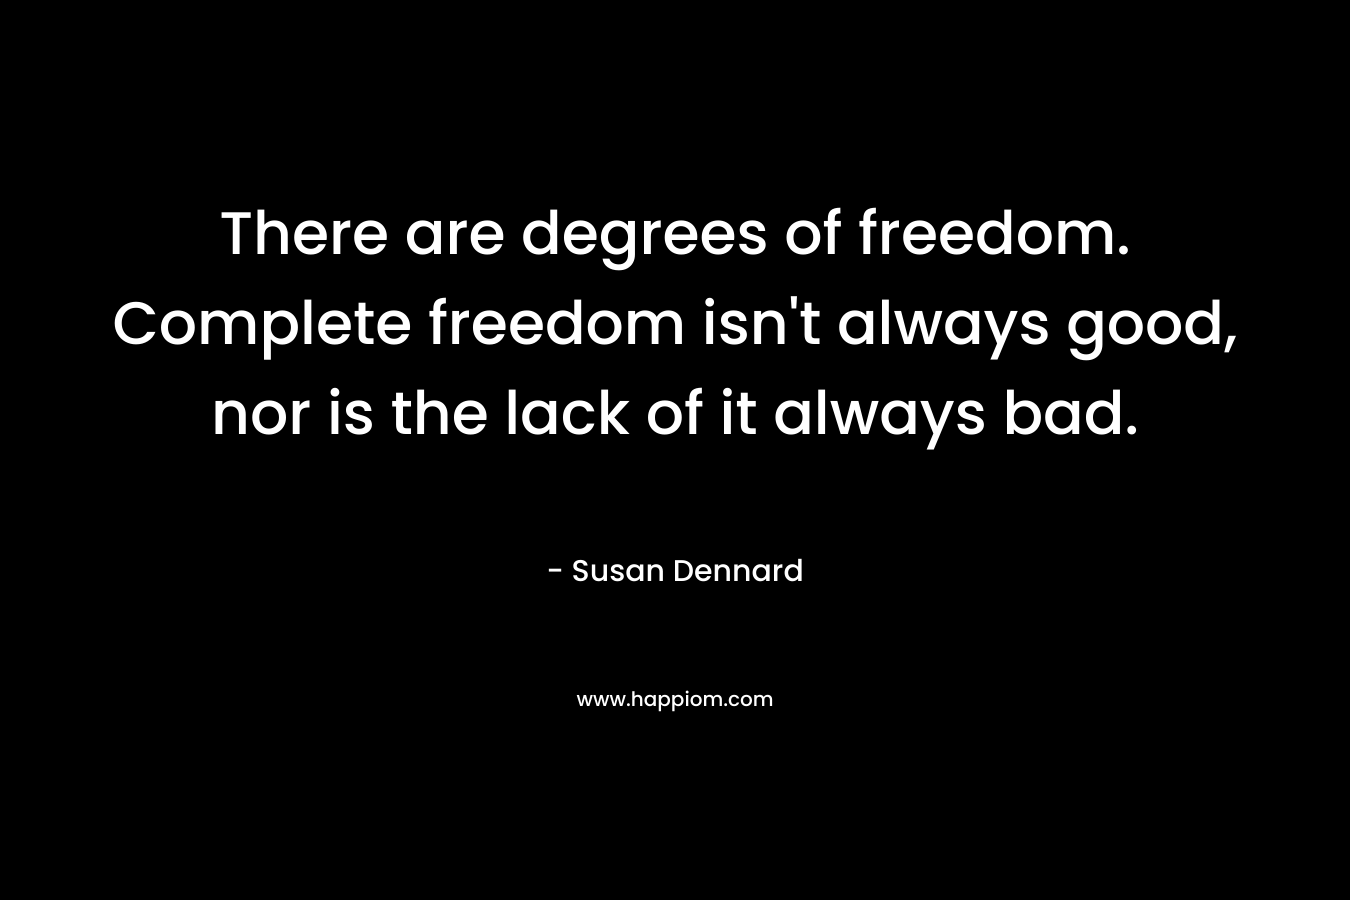 There are degrees of freedom. Complete freedom isn’t always good, nor is the lack of it always bad. – Susan Dennard